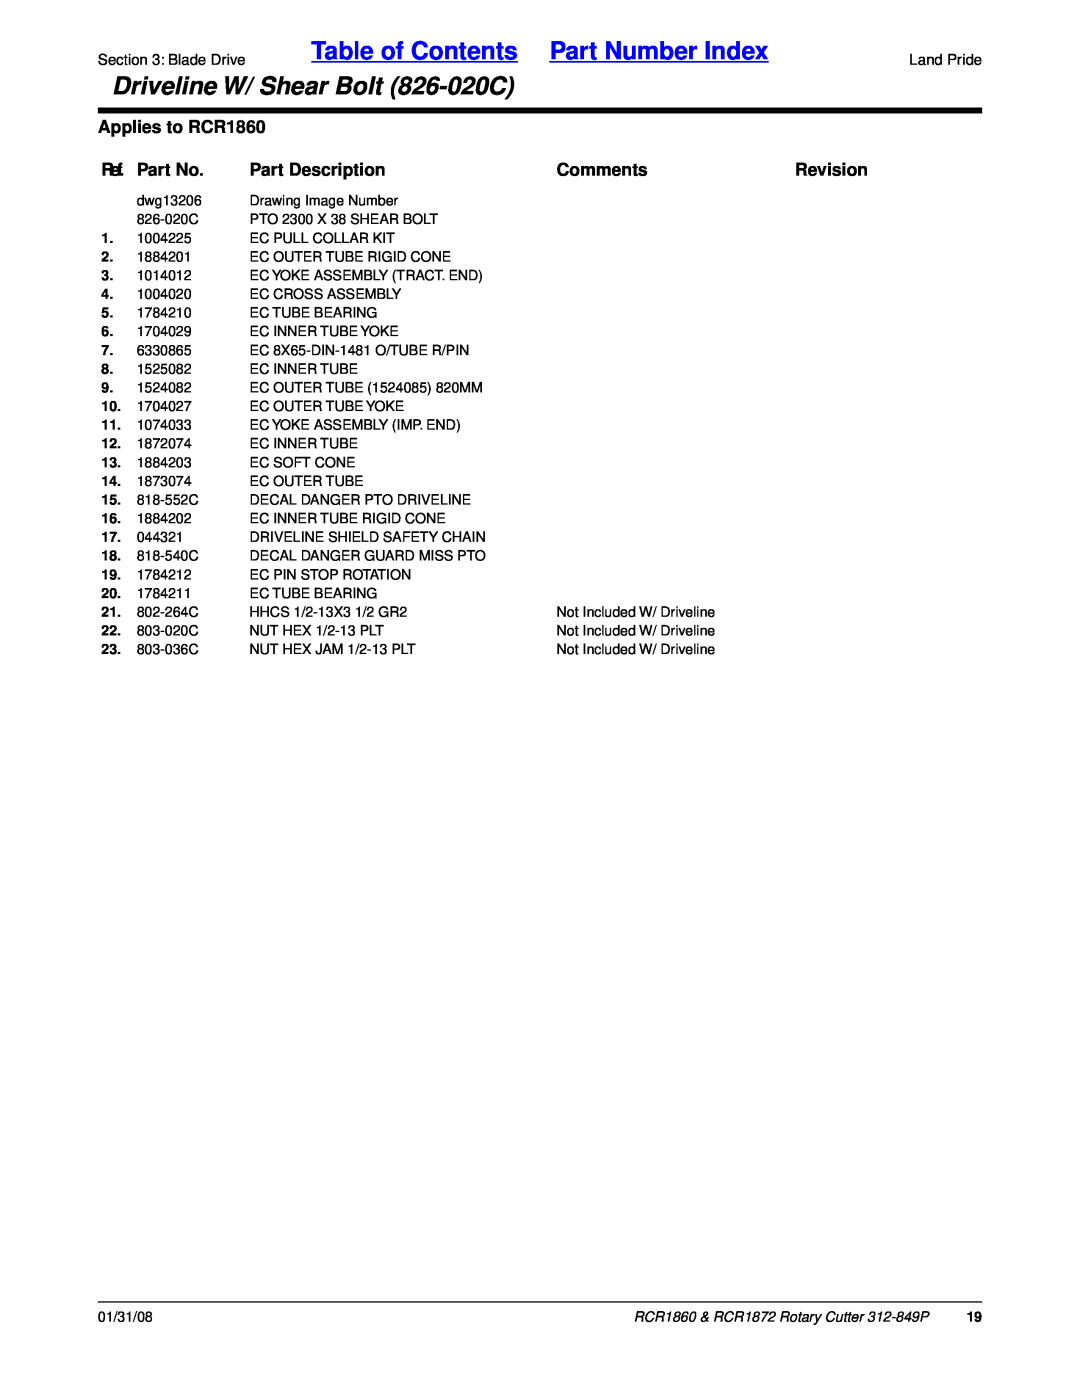 Land Pride RCR1872 Table of Contents Part Number Index, Driveline W/ Shear Bolt 826-020C, Applies to RCR1860, Ref. Part No 